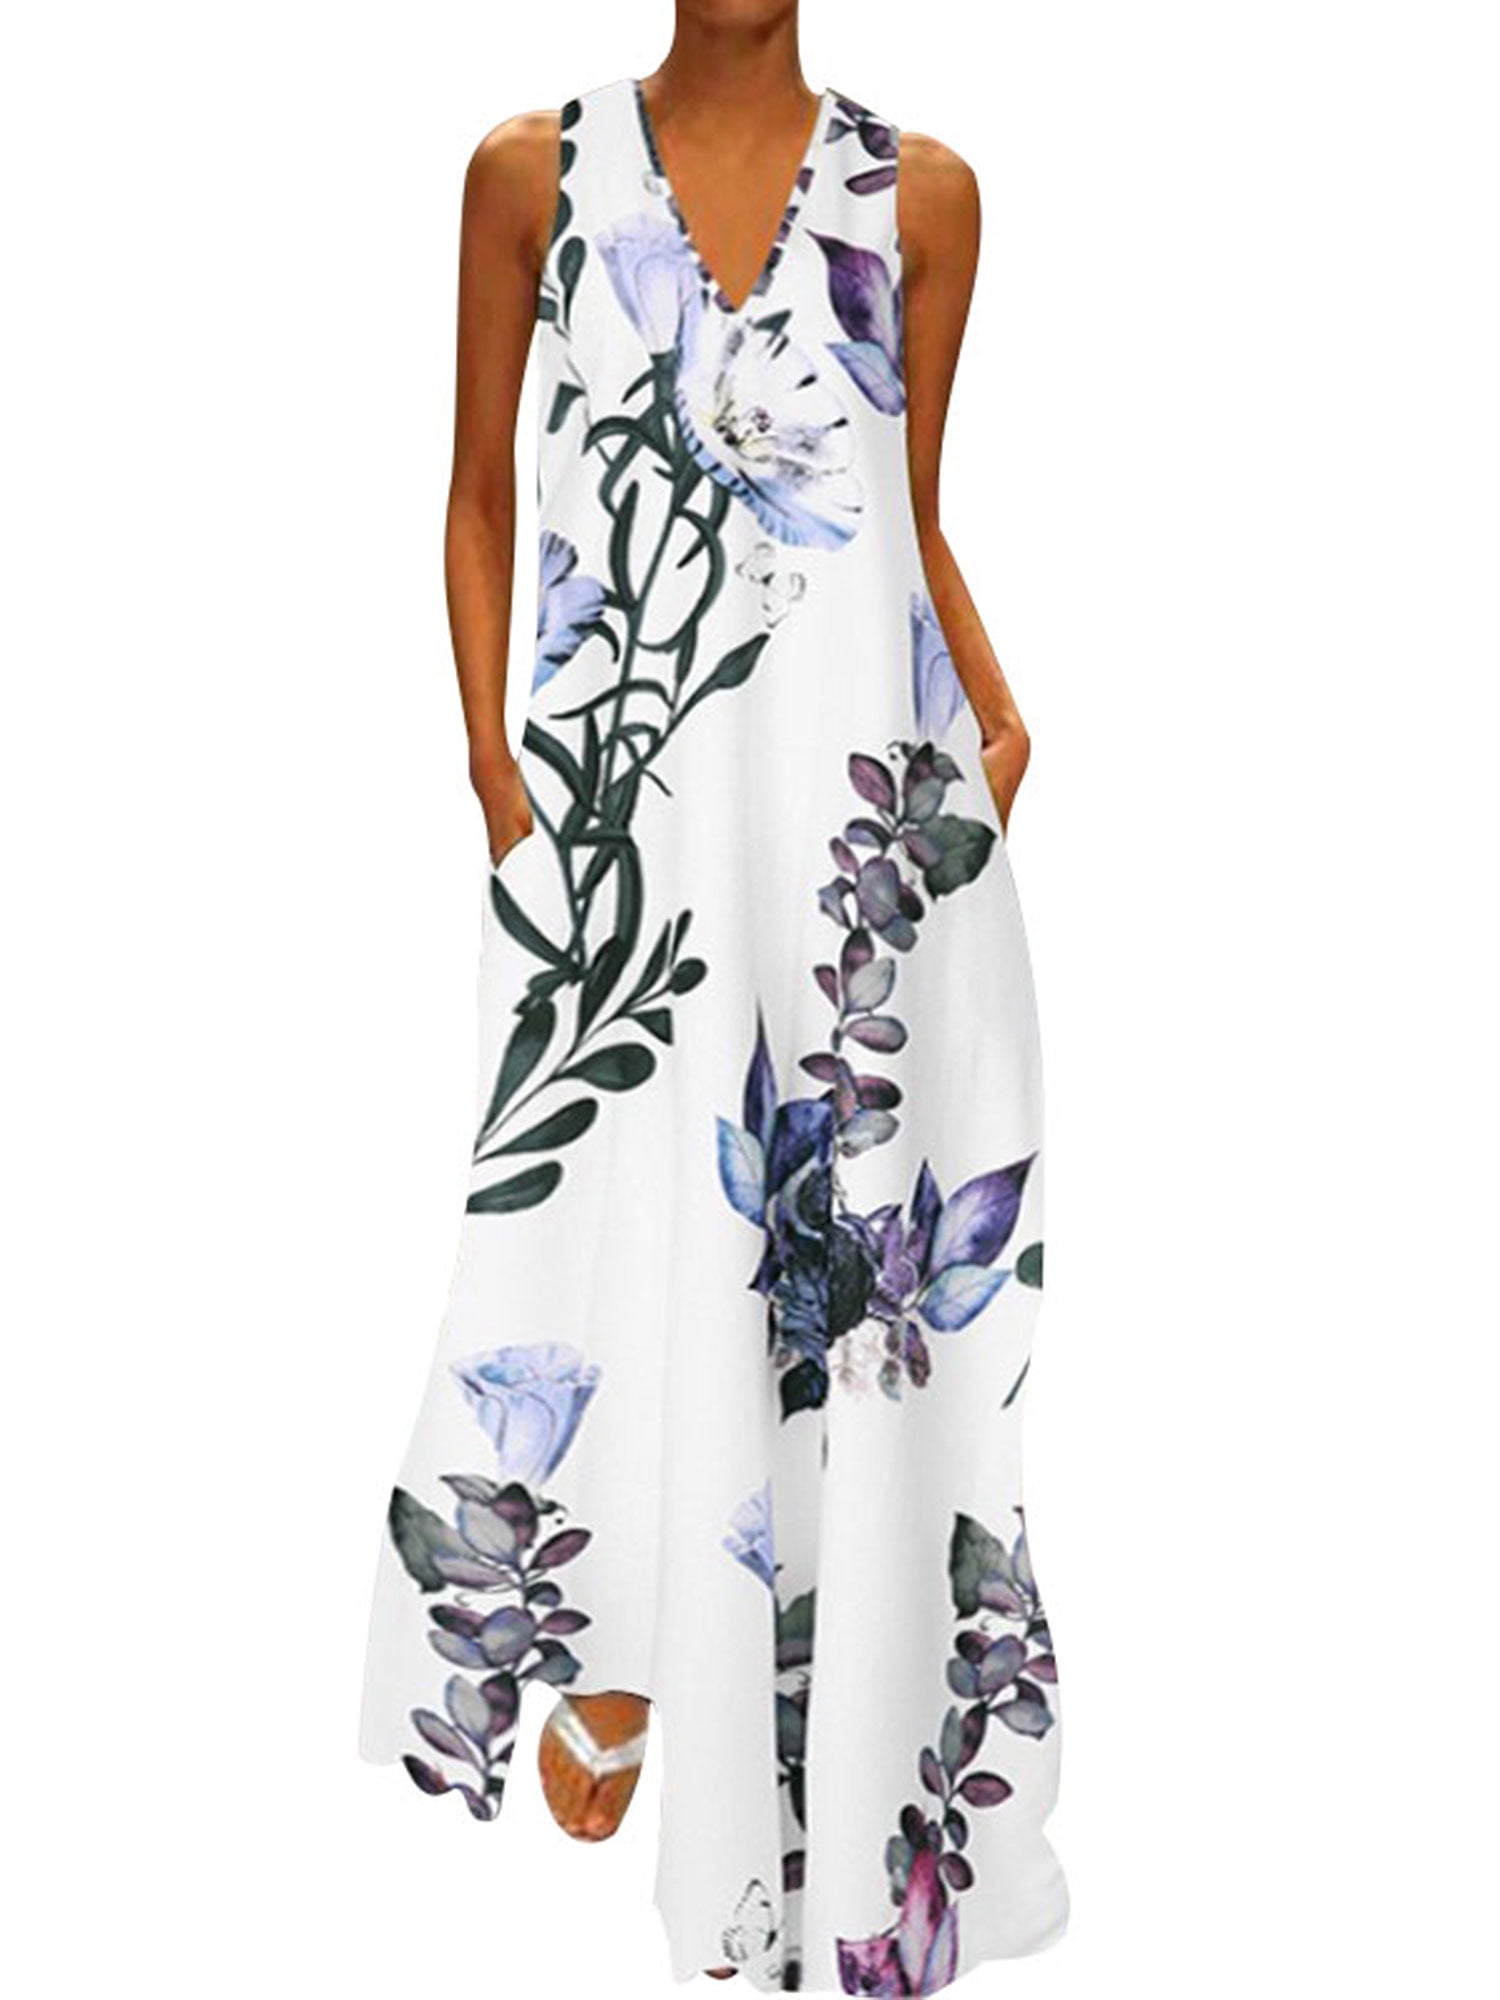 Women Floral Print Baggy Holiday Party Maxi Dress Loose Long Sleeveless Dresses